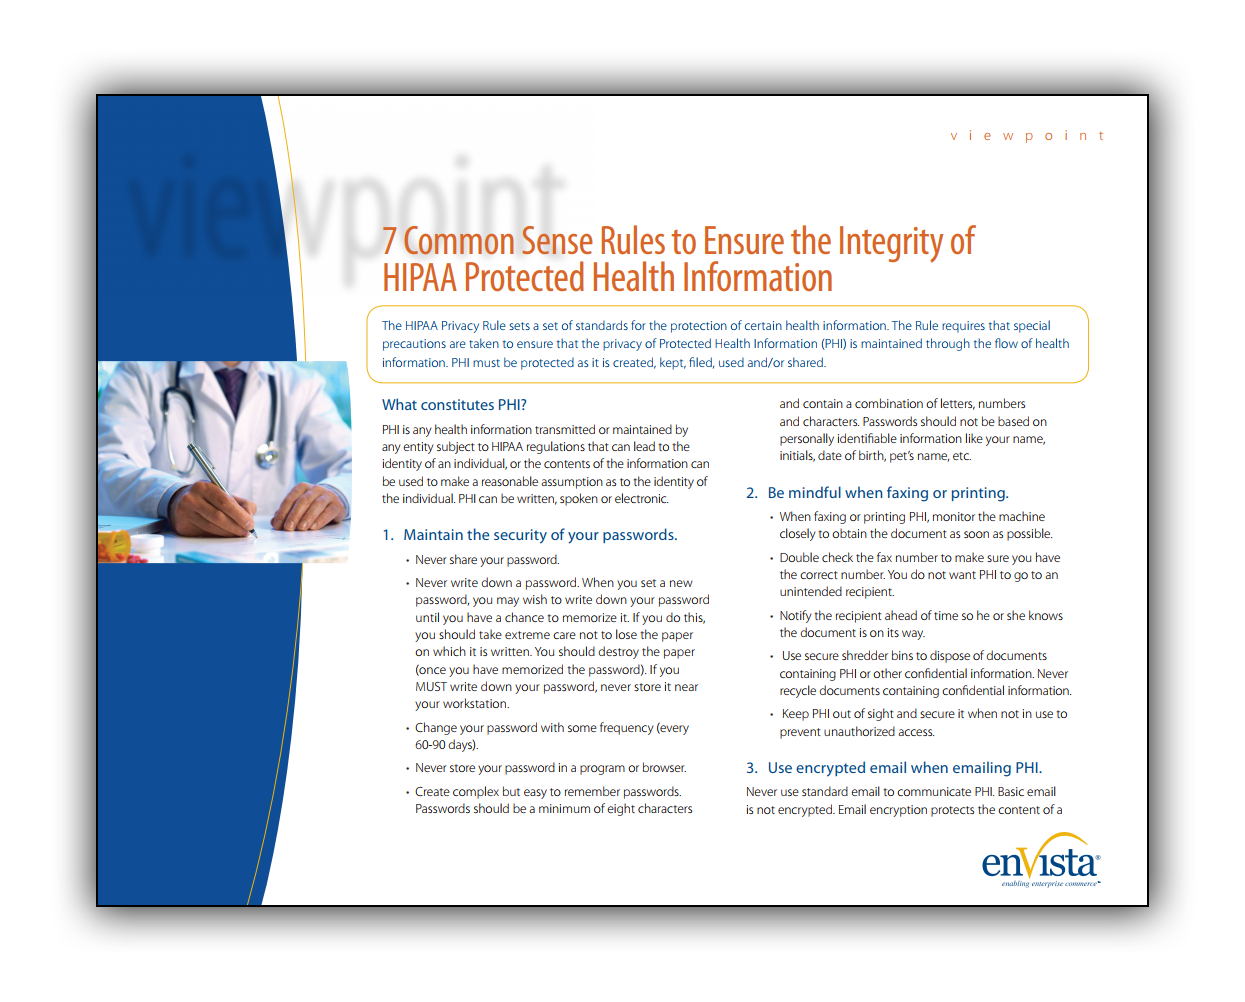 Image_7-common-rules-to-ensure-the-integrity-of-hipaa-protected-health-information.png